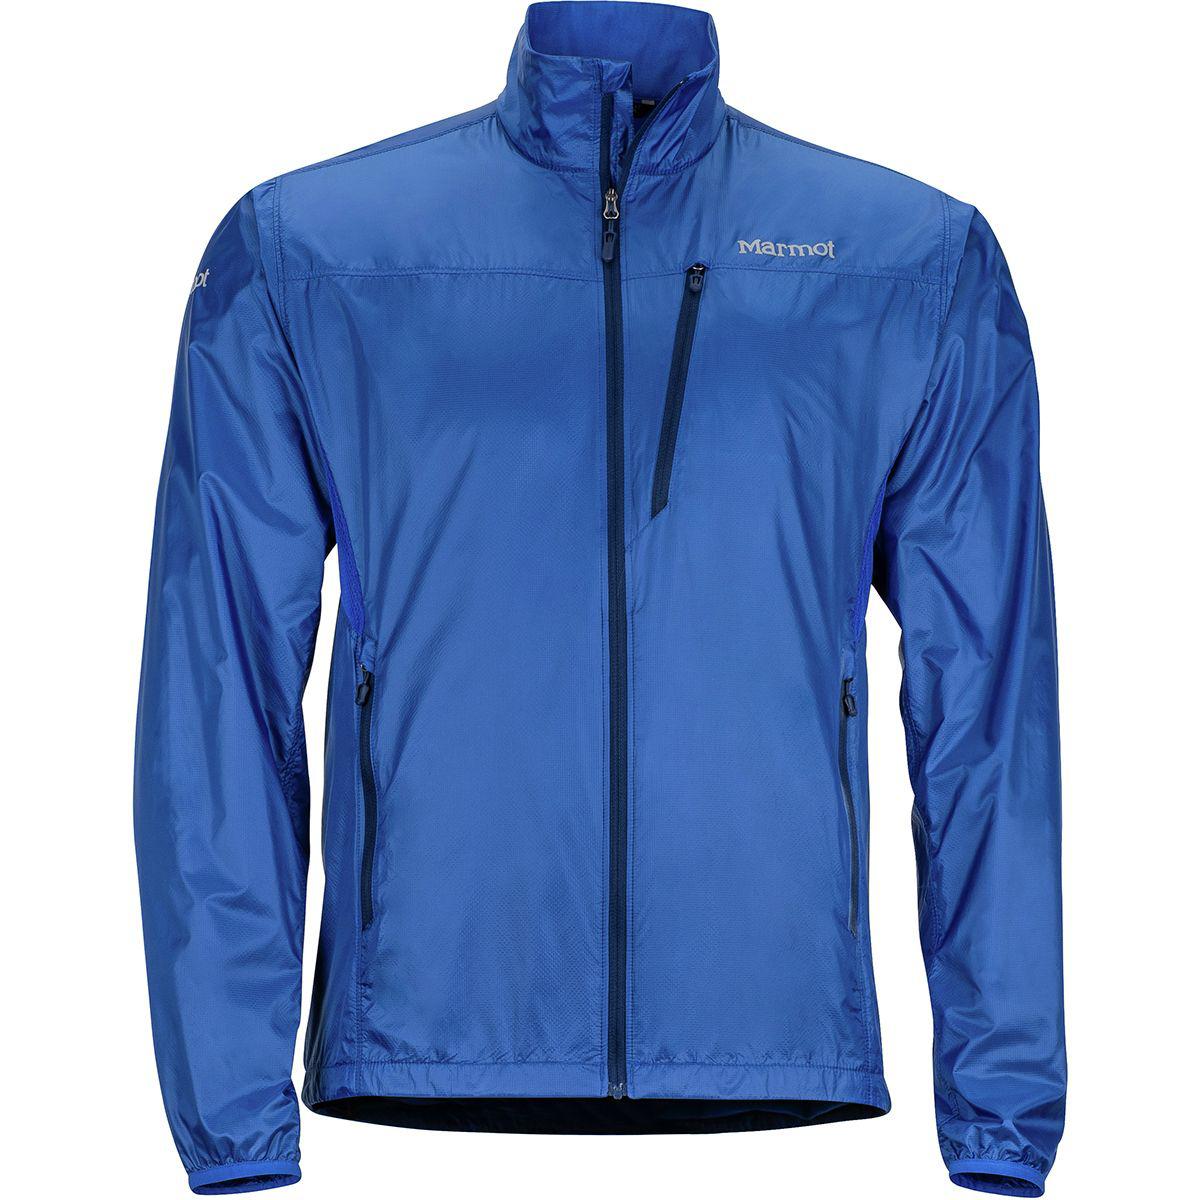 Lyst - Marmot Ether Driclime Jacket in Blue for Men